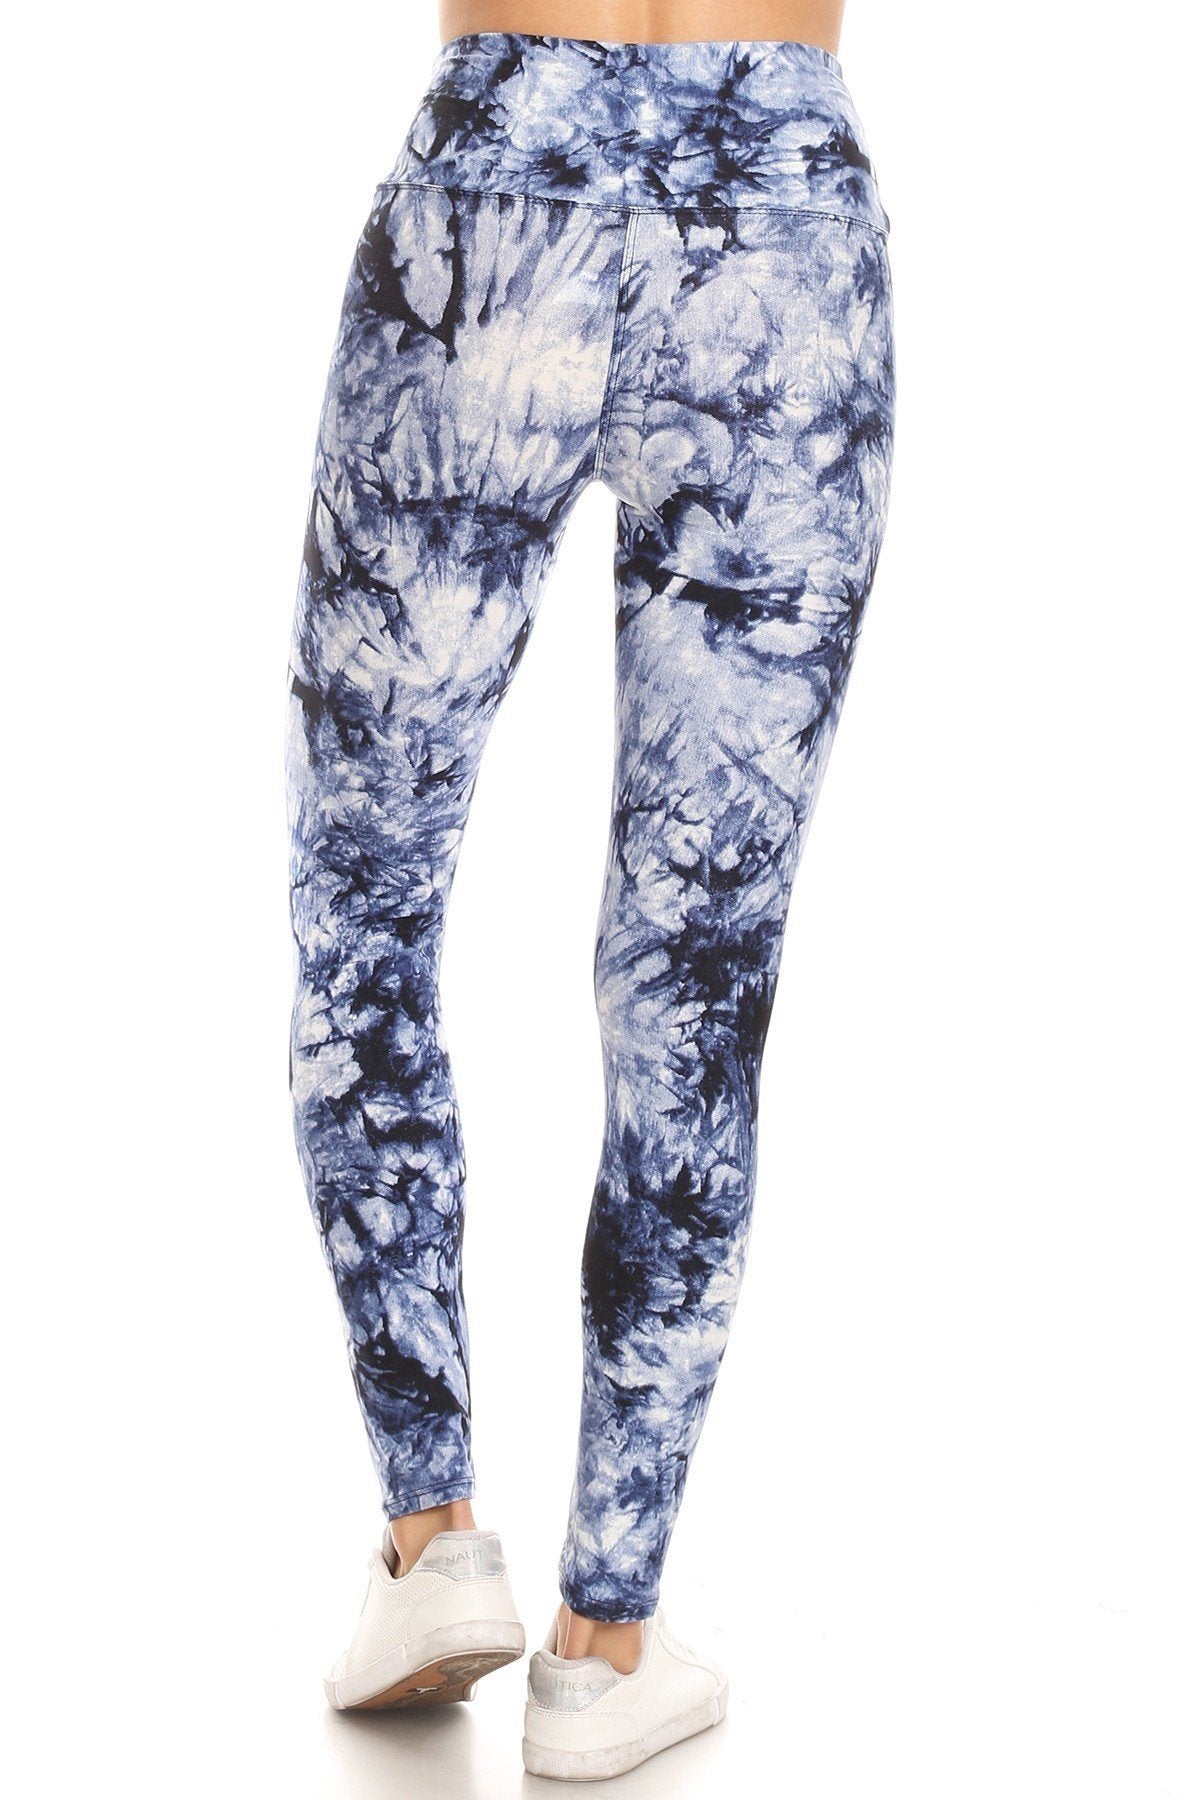 5-inch Long Yoga Style Banded Lined Tie Dye Printed Knit Legging With High Waist - Fashion Quality Boutik